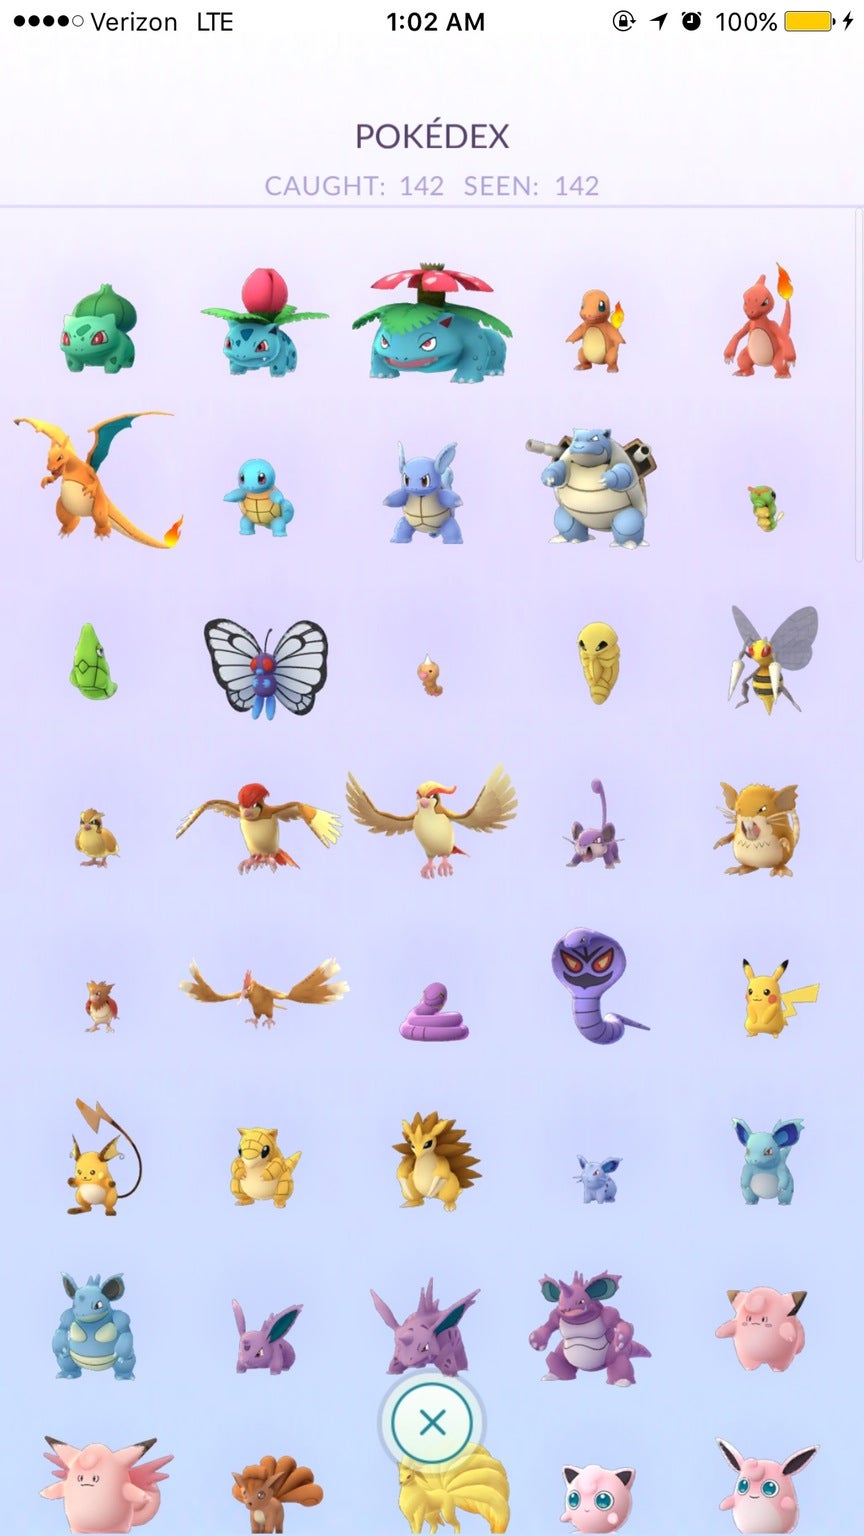 This is how the almost full Pokédex looks - Someone already caught all the 142 wild Pokémon roaming the U.S.